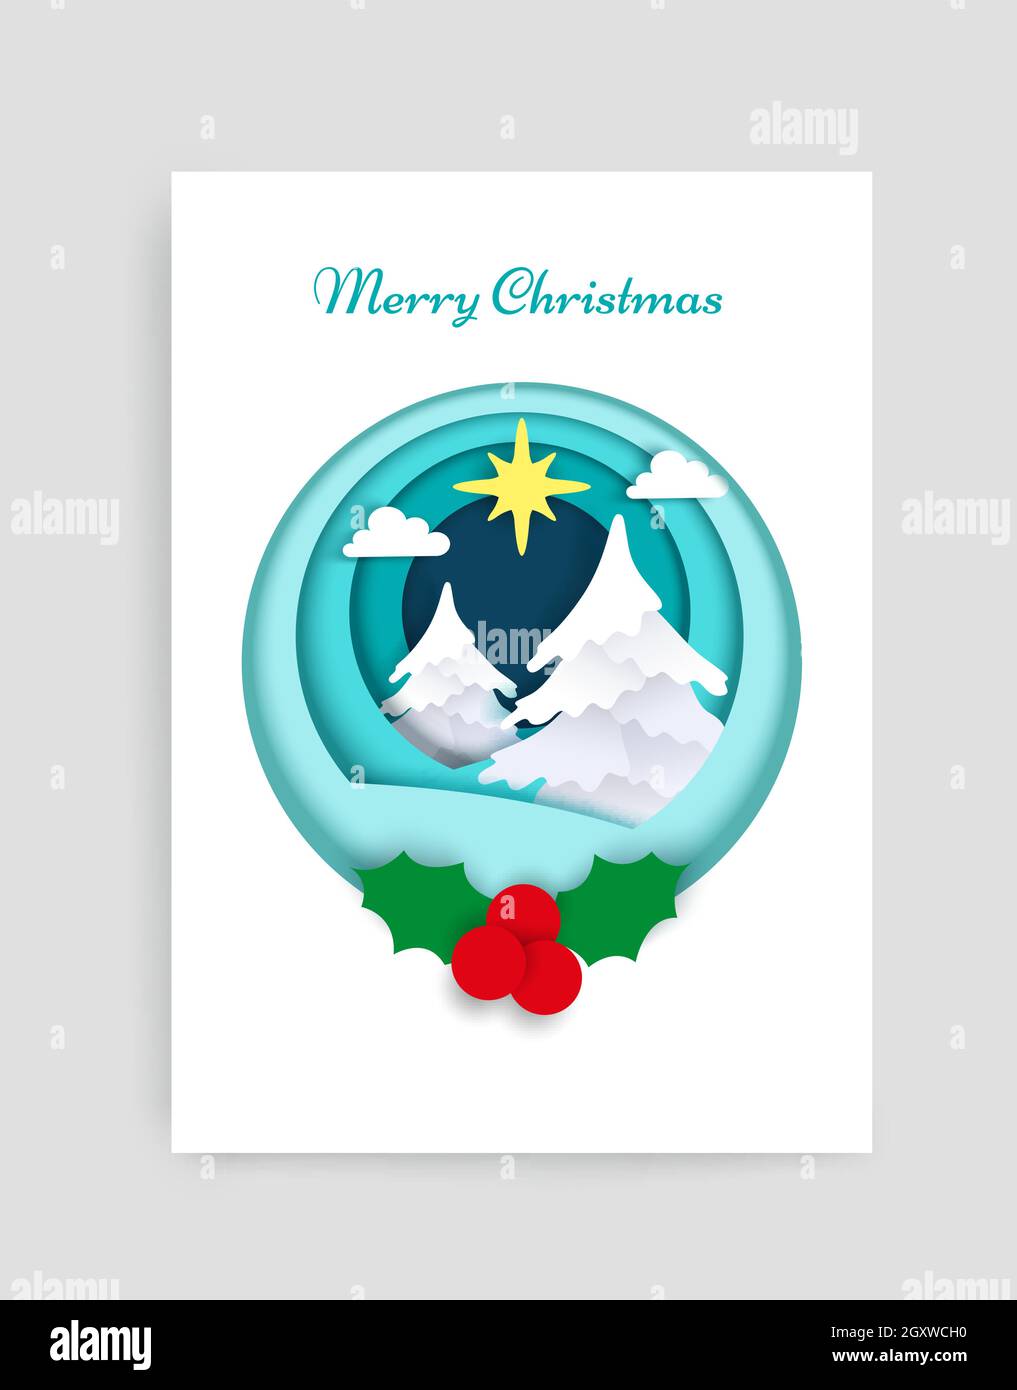 Merry Christmas card vector design template. Paper cut craft style white snowy Christmas trees, holly berries in circle. Stock Vector